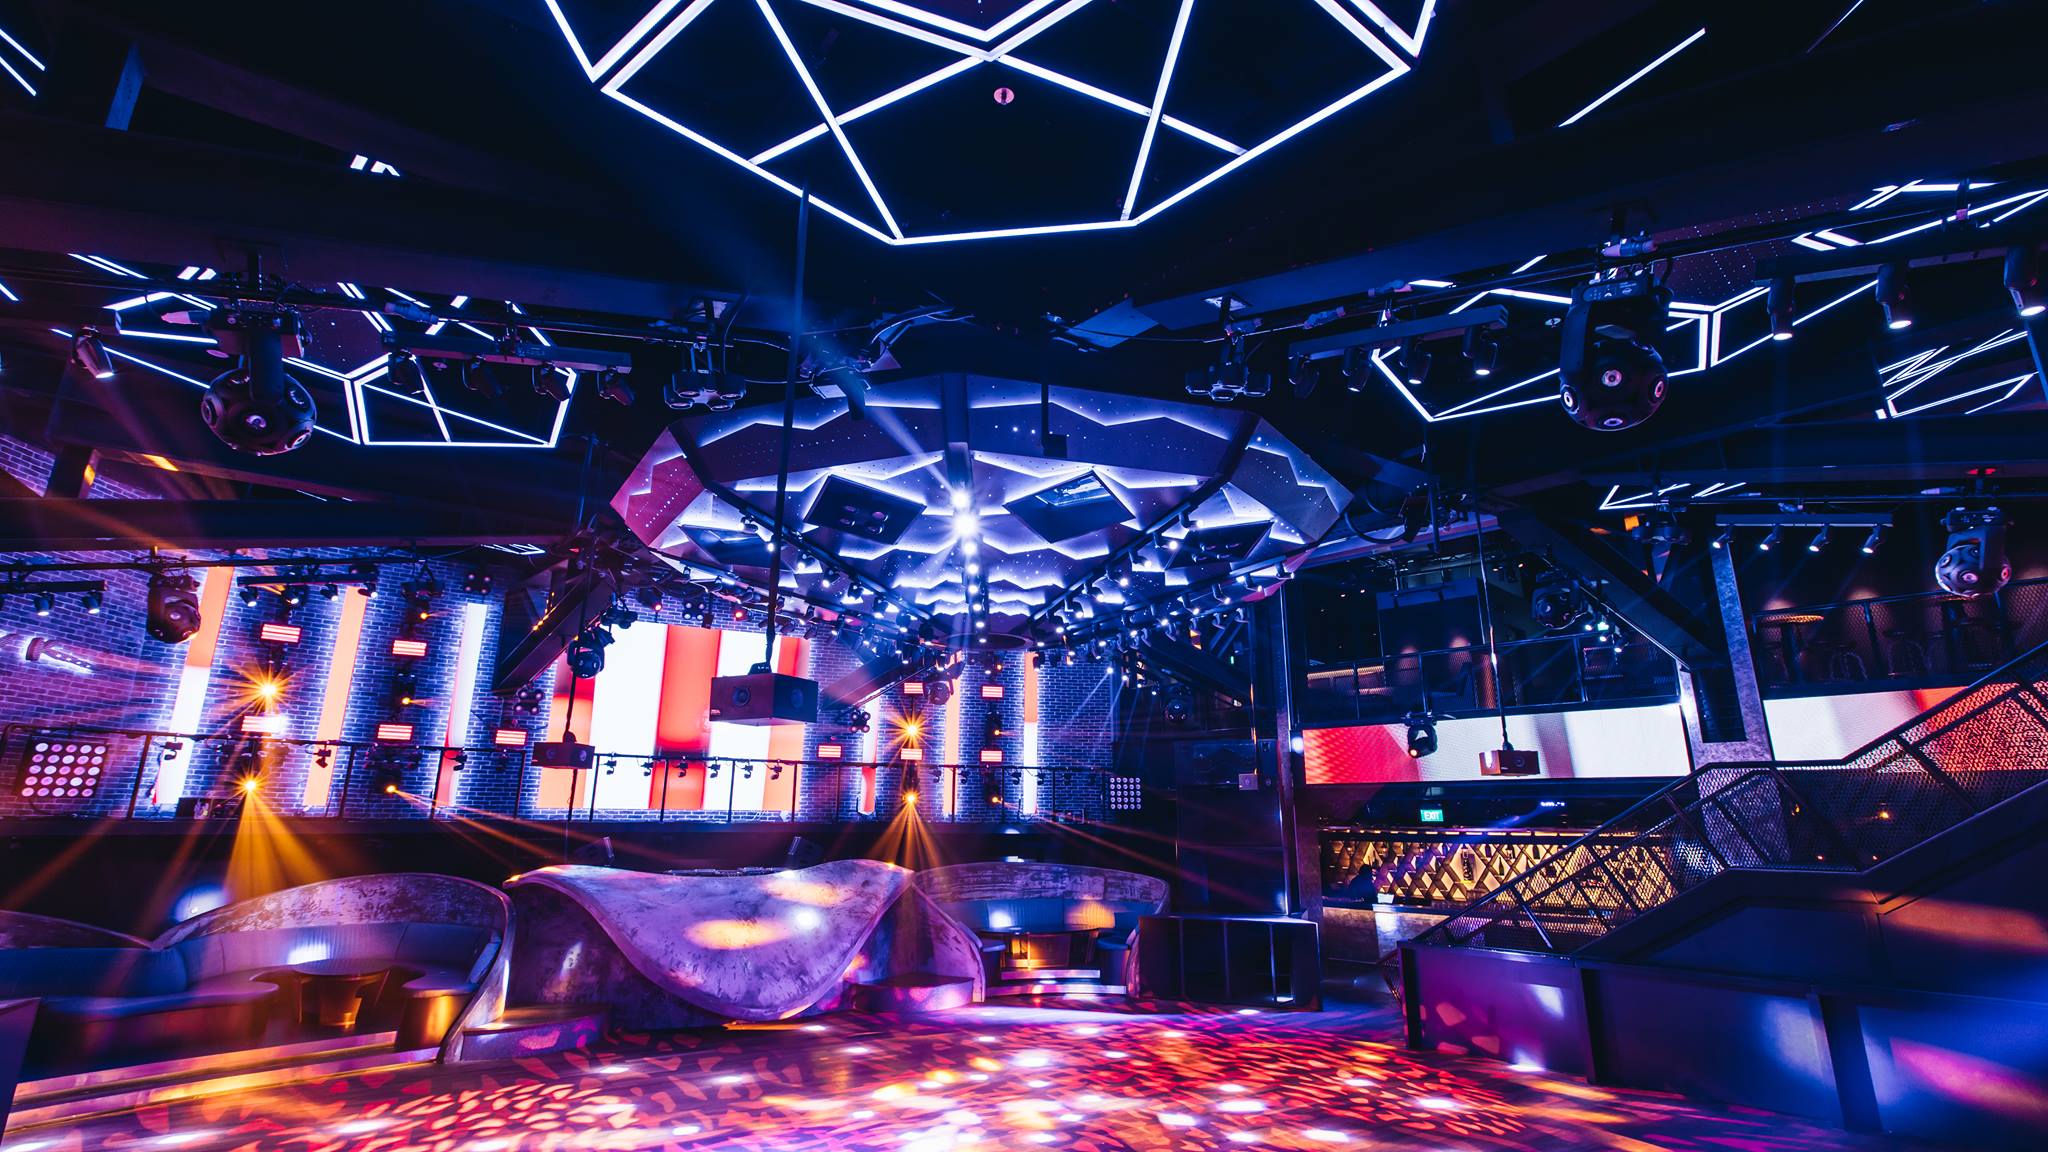 The Zouk Members programme officially returns with an exclusive lounge